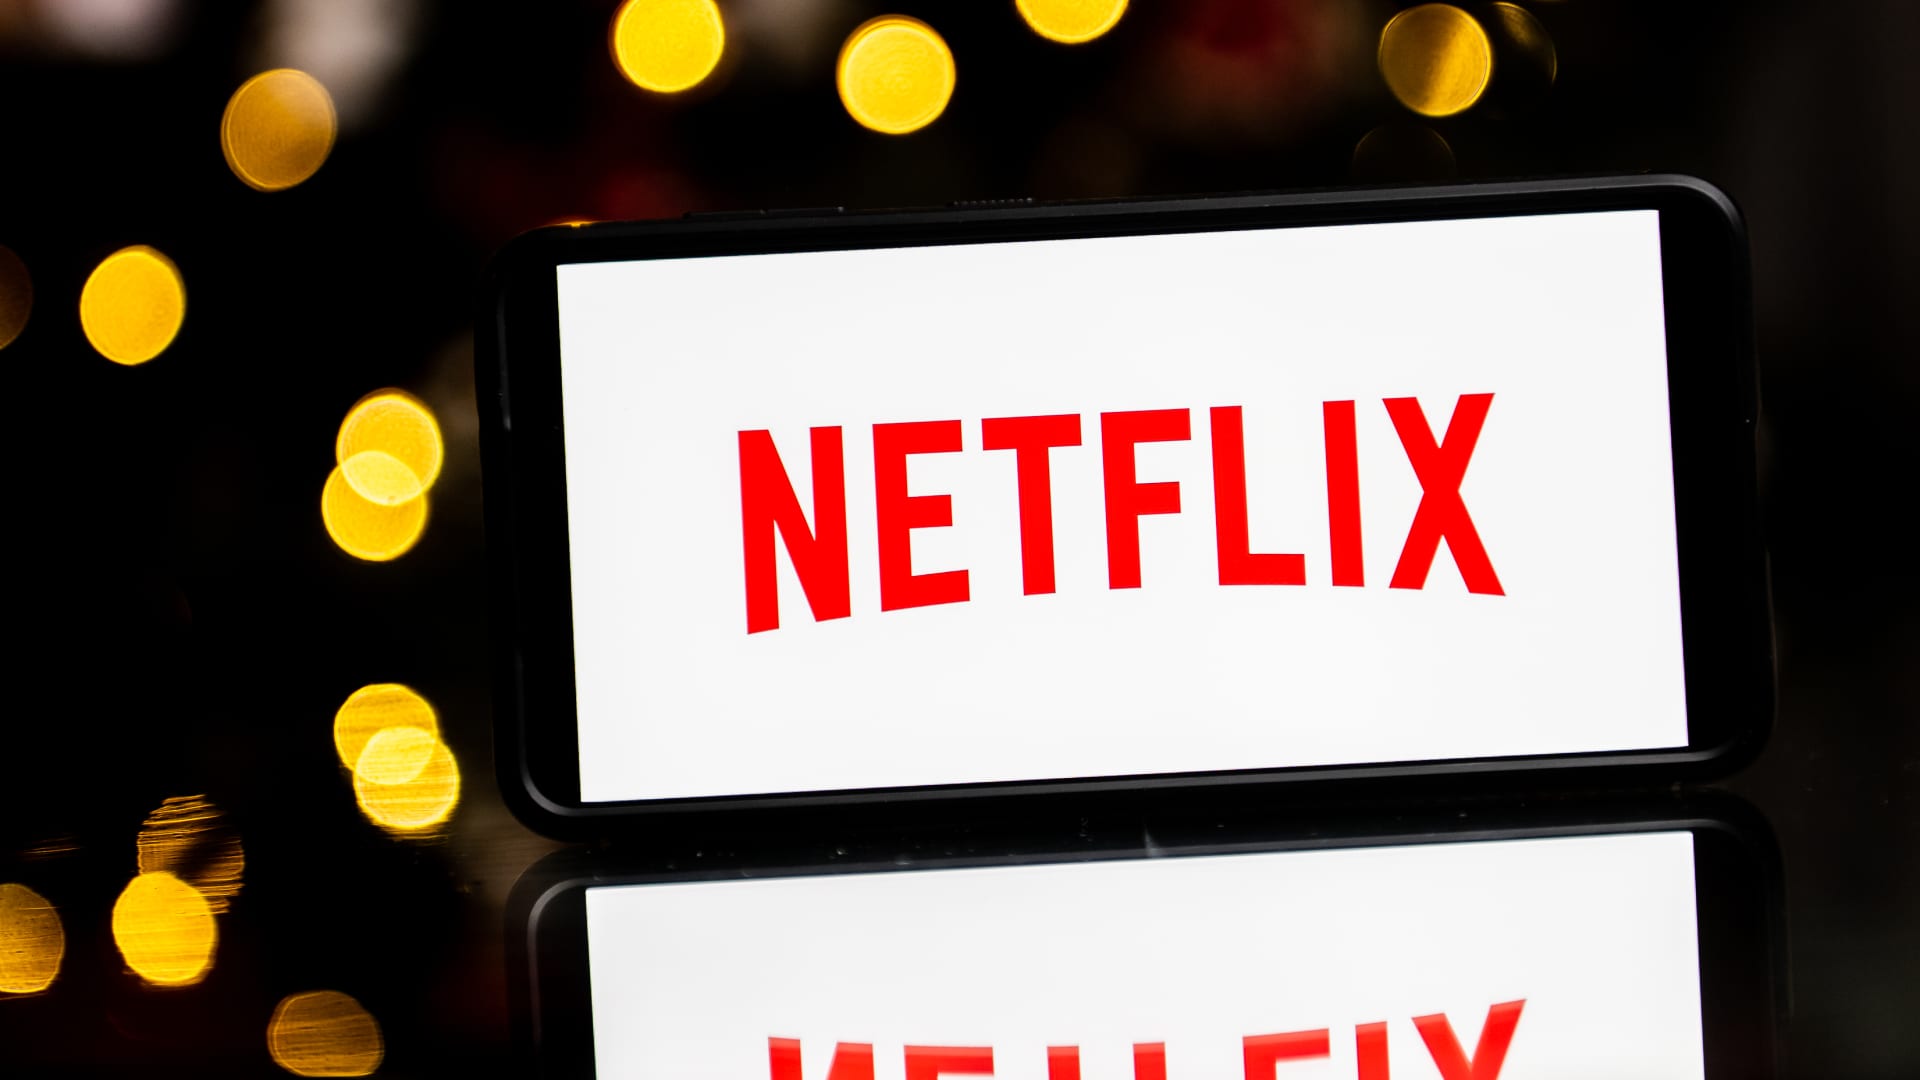 Netflix is about to report earnings — here’s what to expect